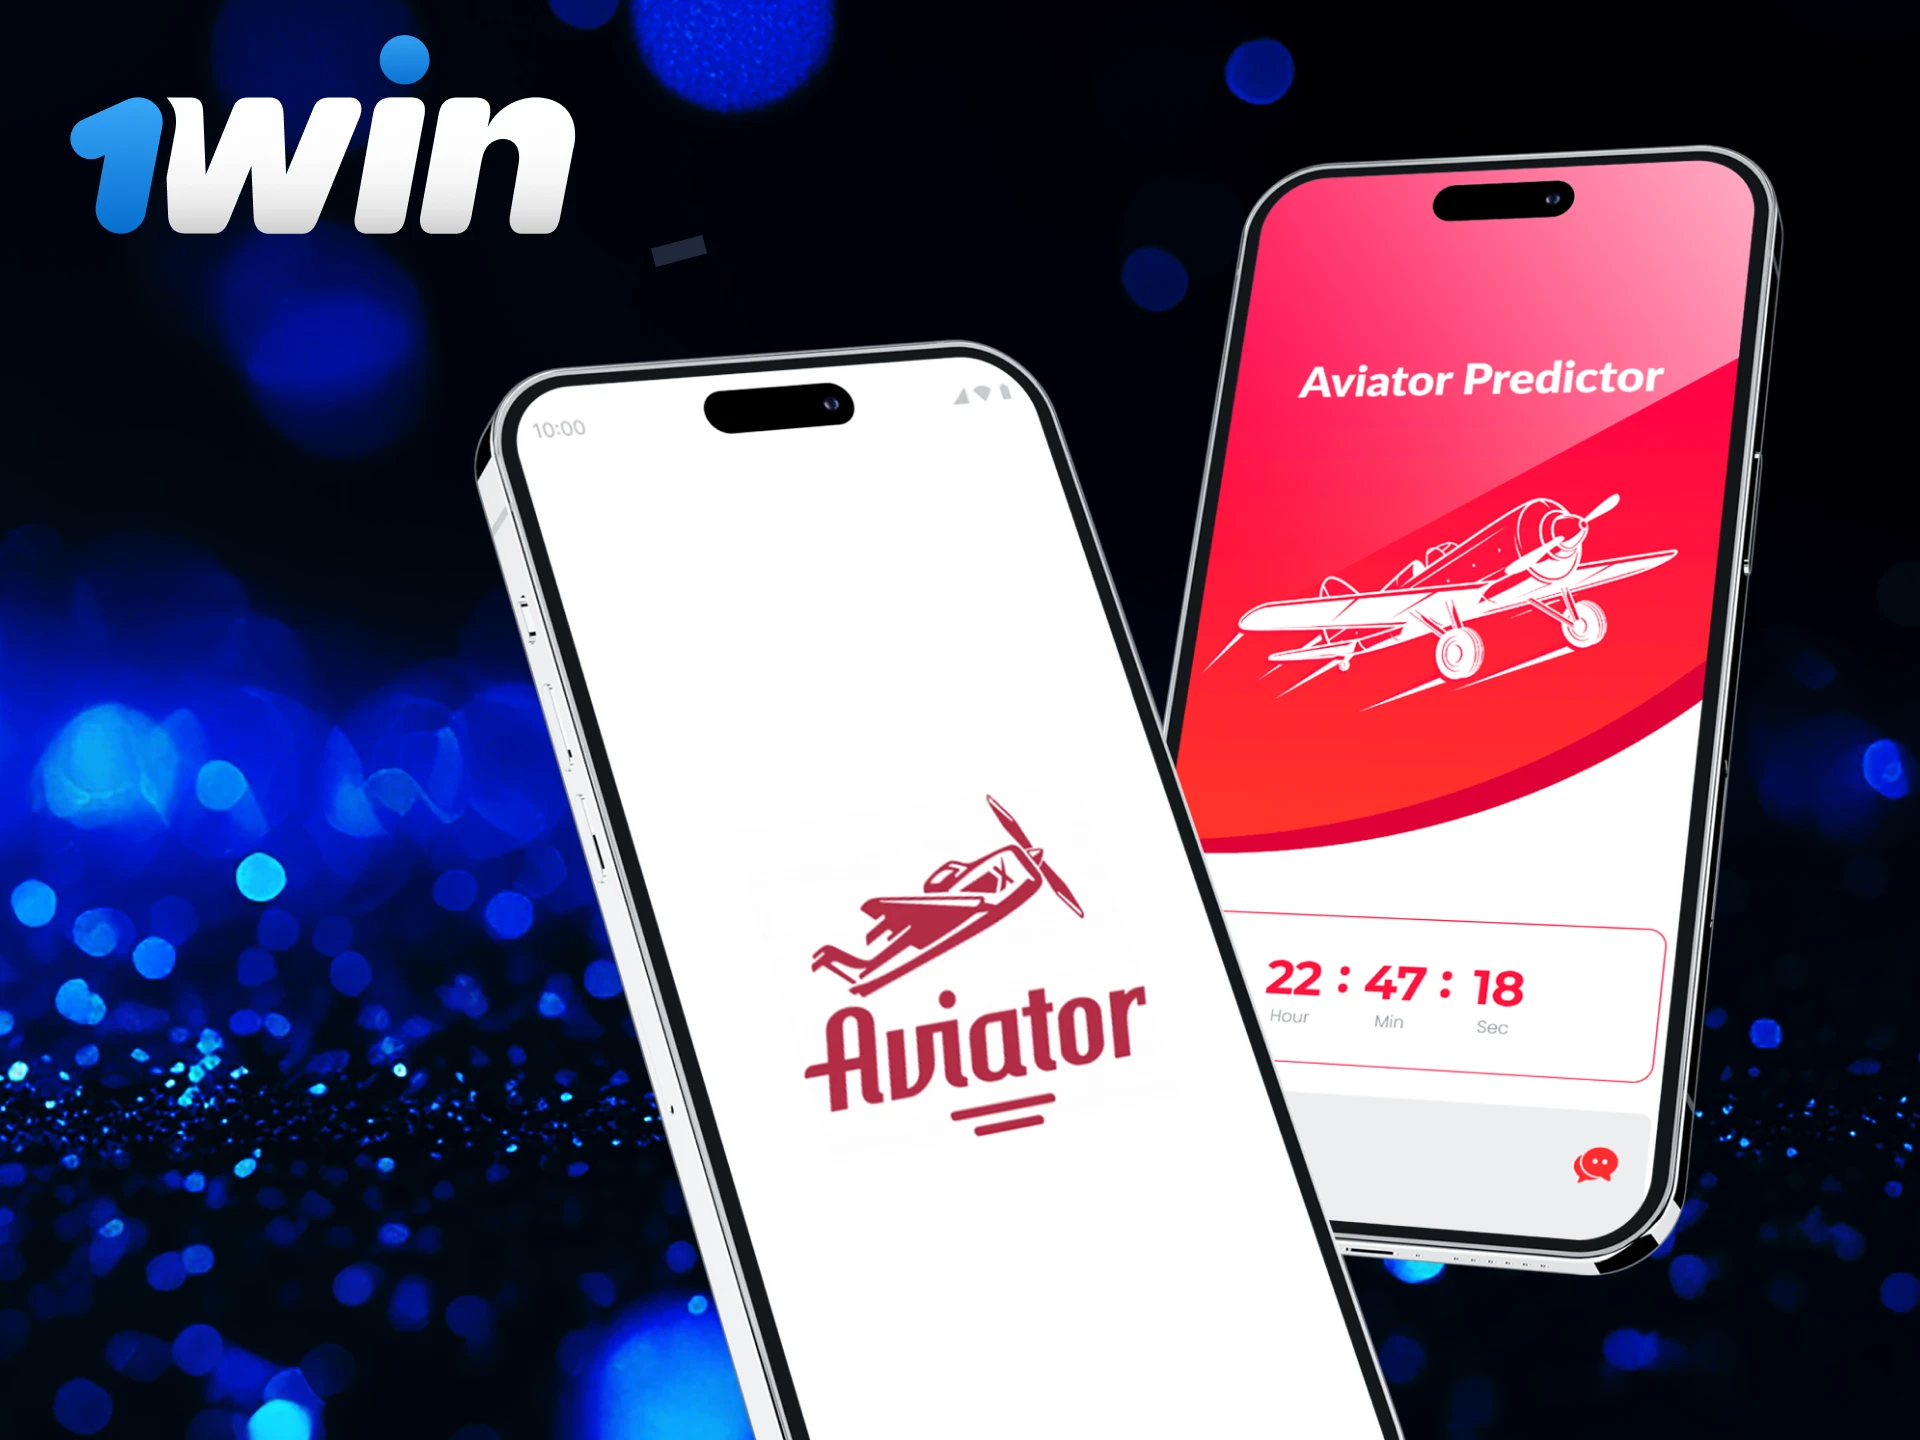 Why do you need a predictor tool for the Aviator game on the 1Win casino website.